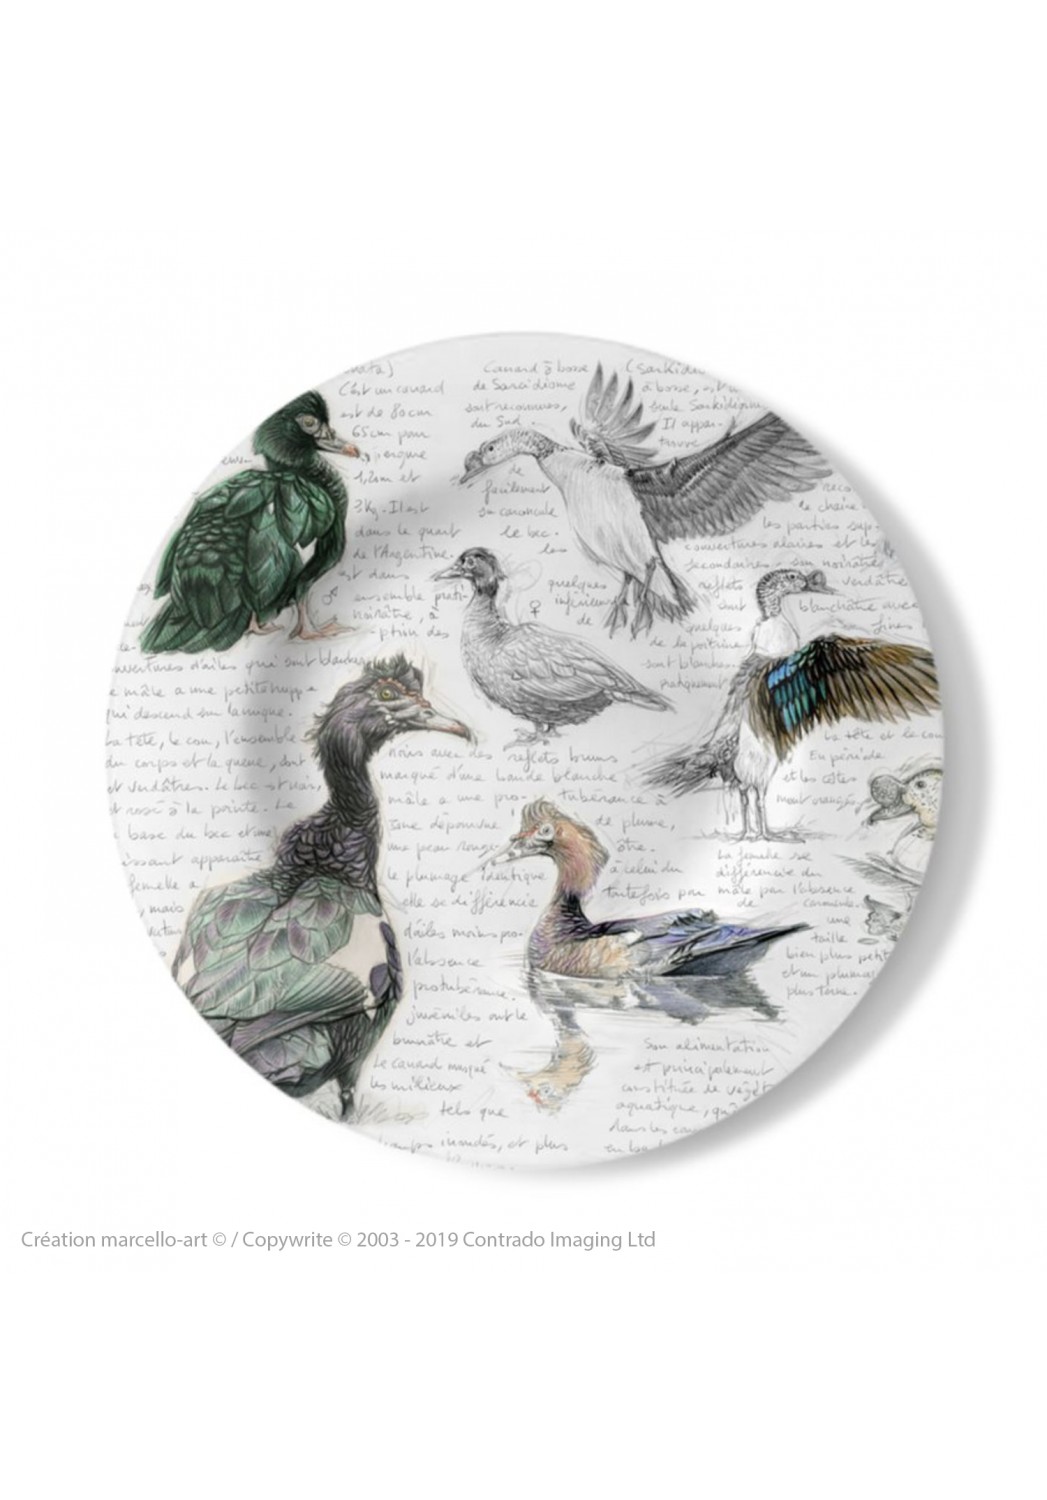 Marcello-art: Decorating Plates Decoration plates 238 Muscovy Duck & Knob-billed Duck